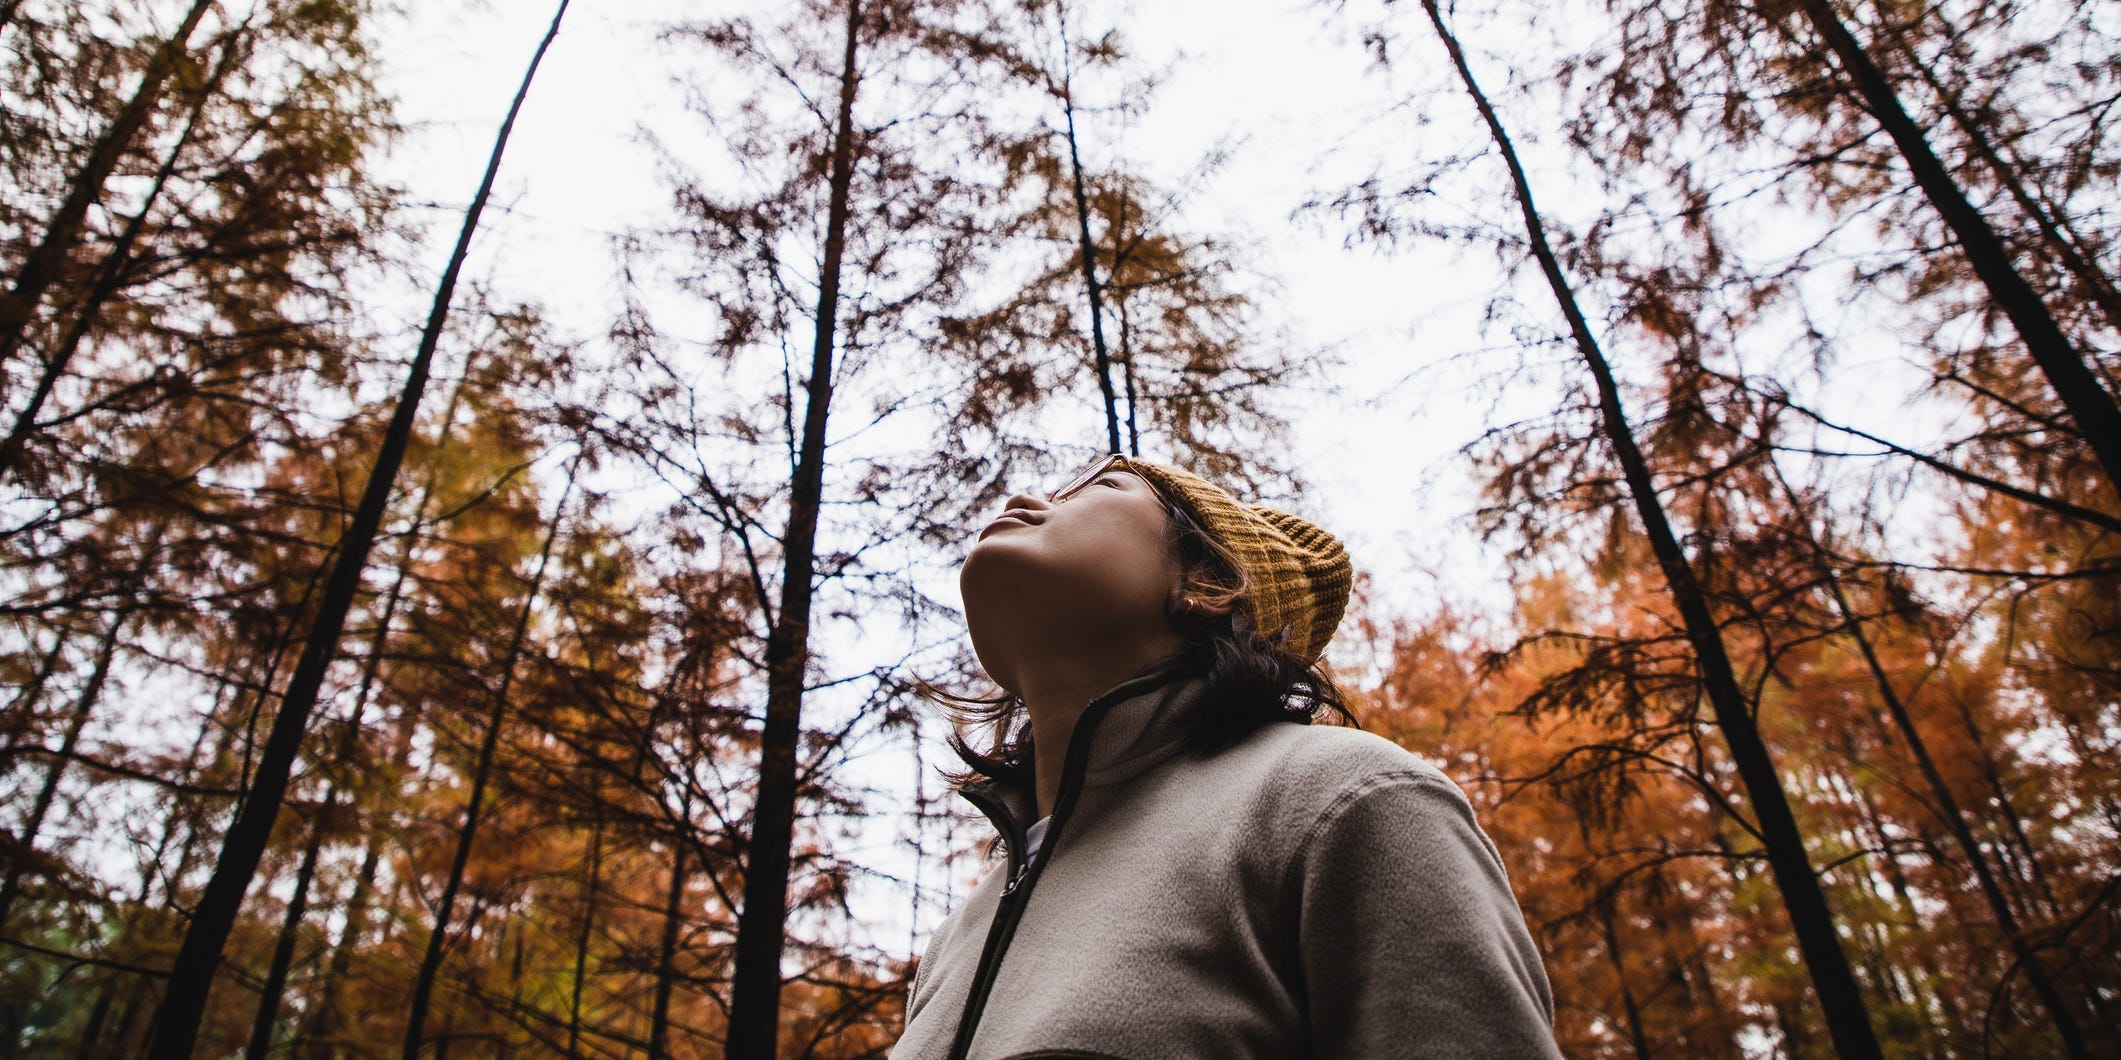 A woman takes a break and goes for a walk in the woods, stopping to gaze up at the sky peacefully.